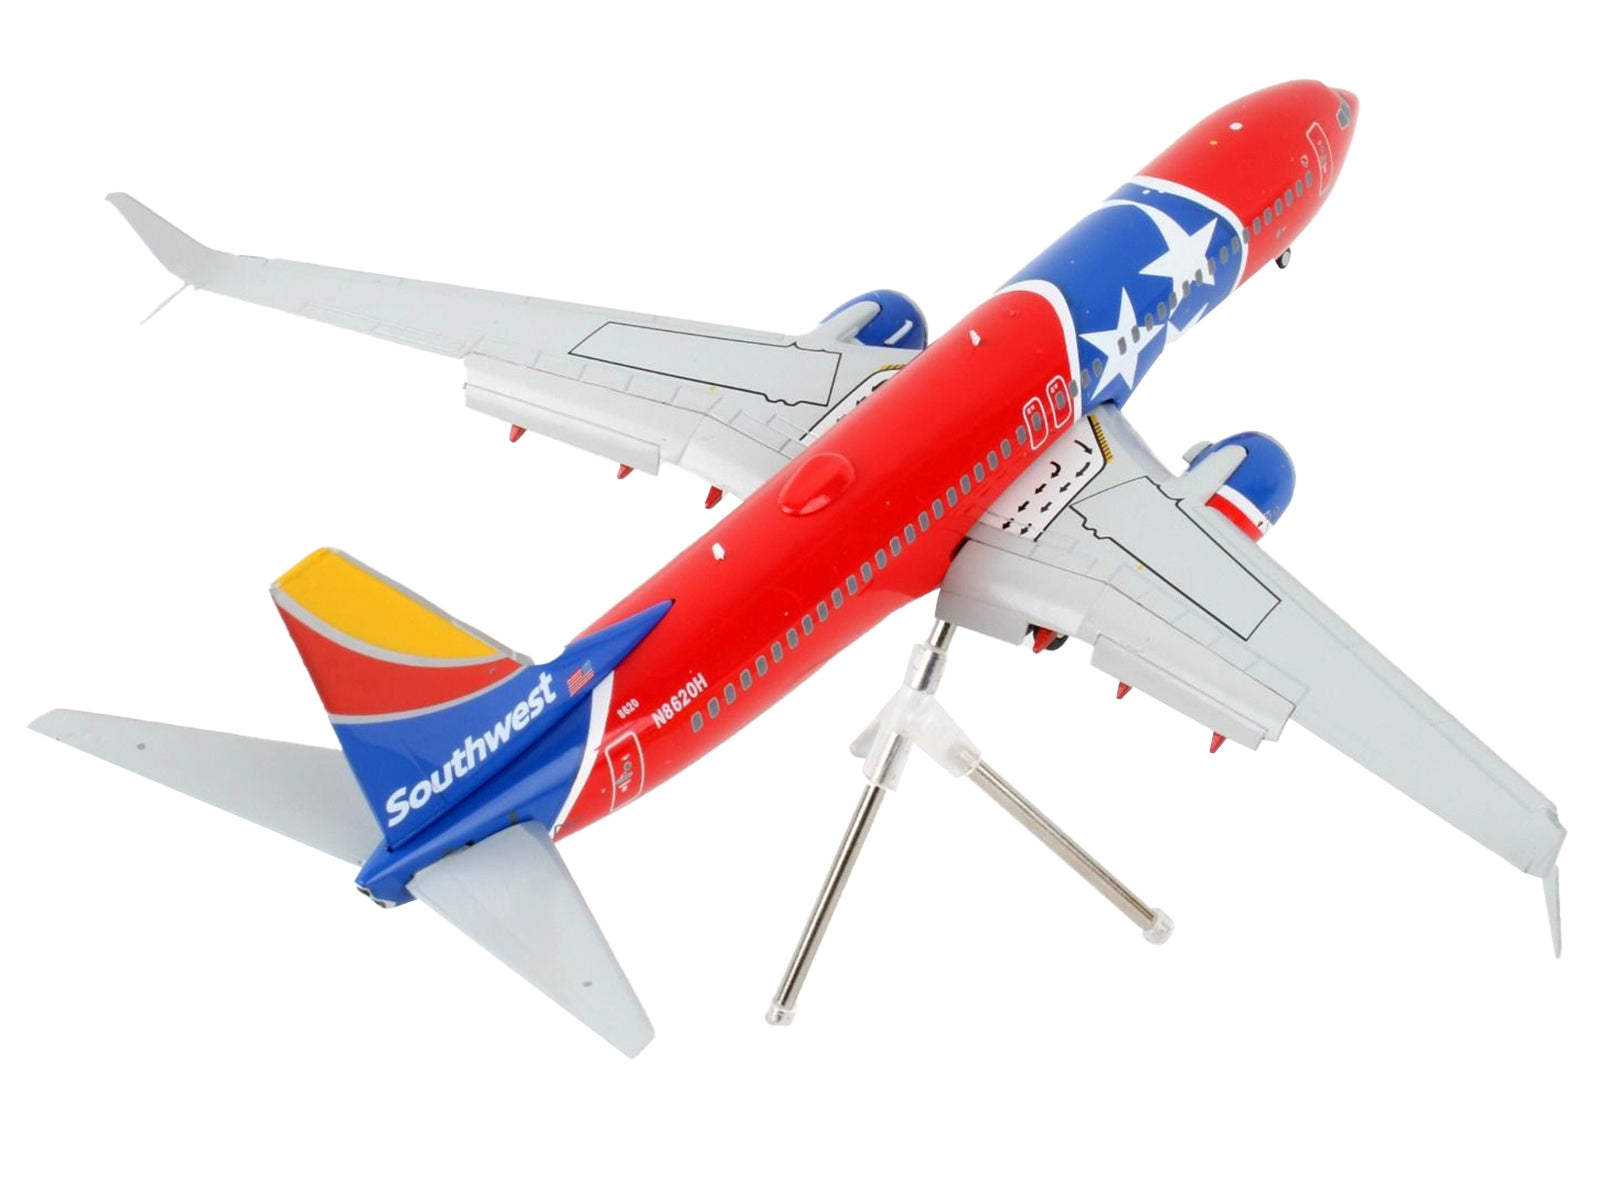 GeminiJets 1/200 Diecast: Boeing 737-800 "Southwest Airlines - Tennessee One" with Flaps Down, Tennessee Flag Livery